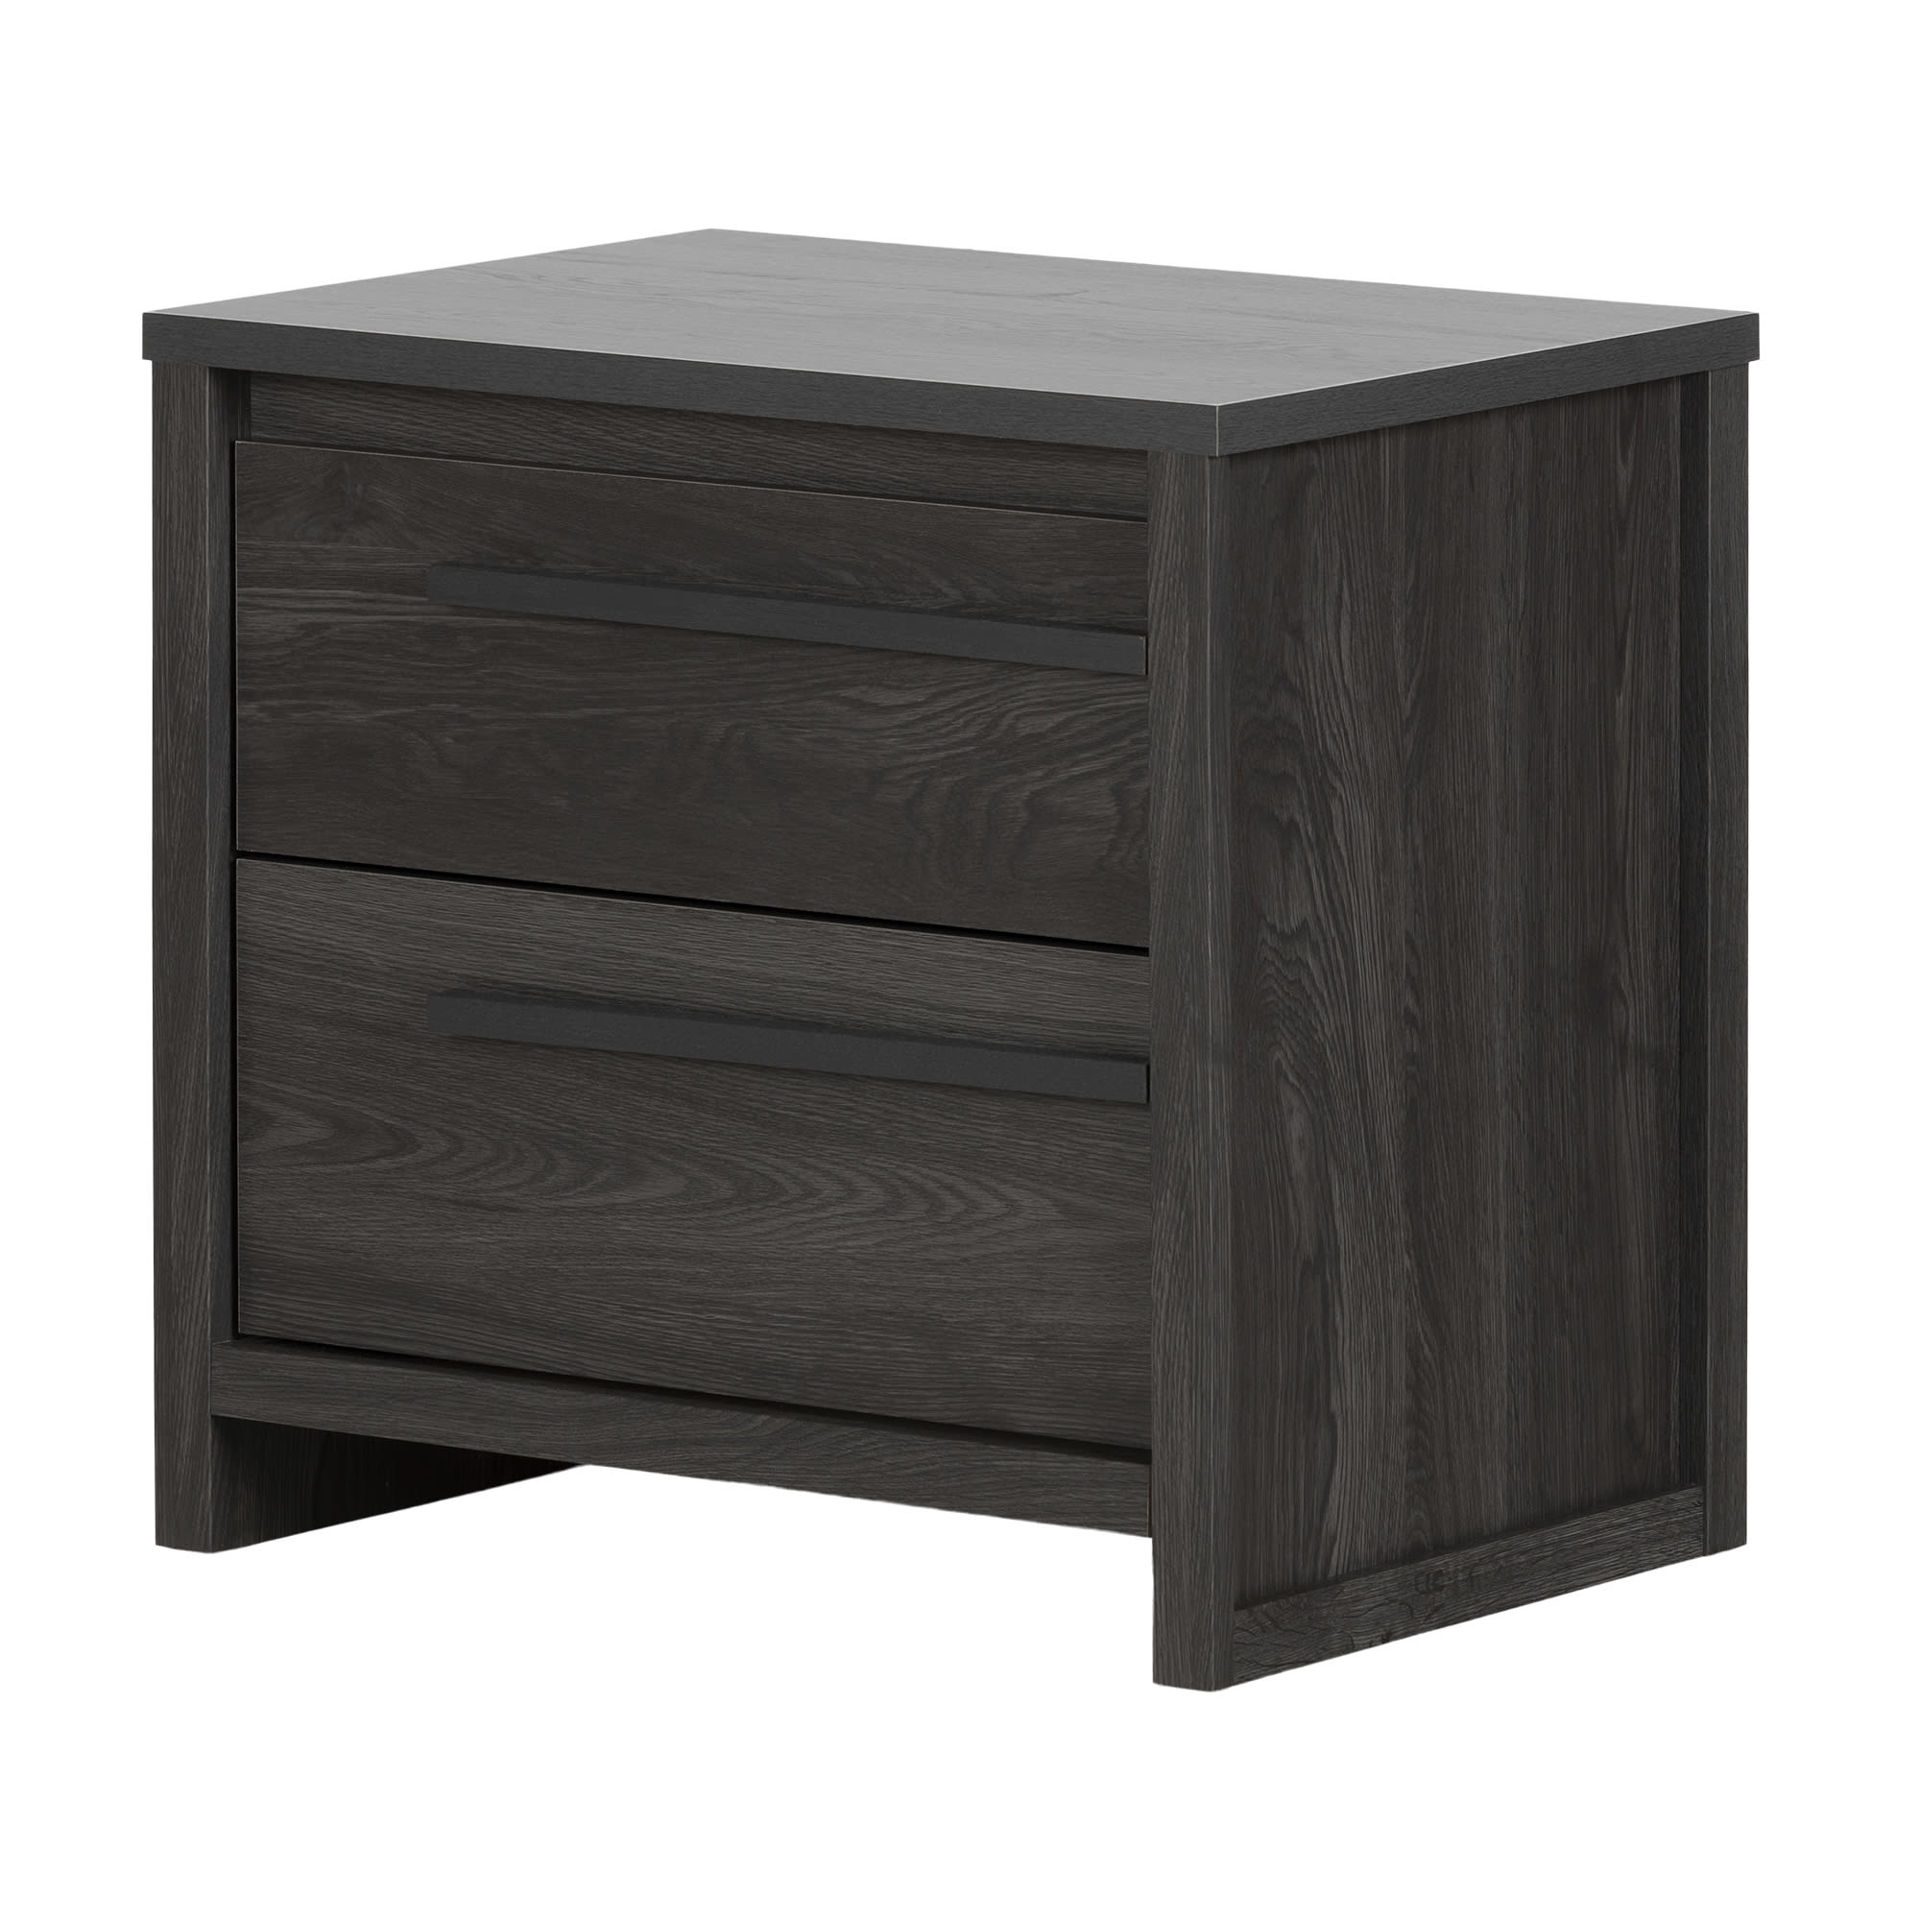 11315 - Fusion - 1-Drawer Nightstand | AFW.com